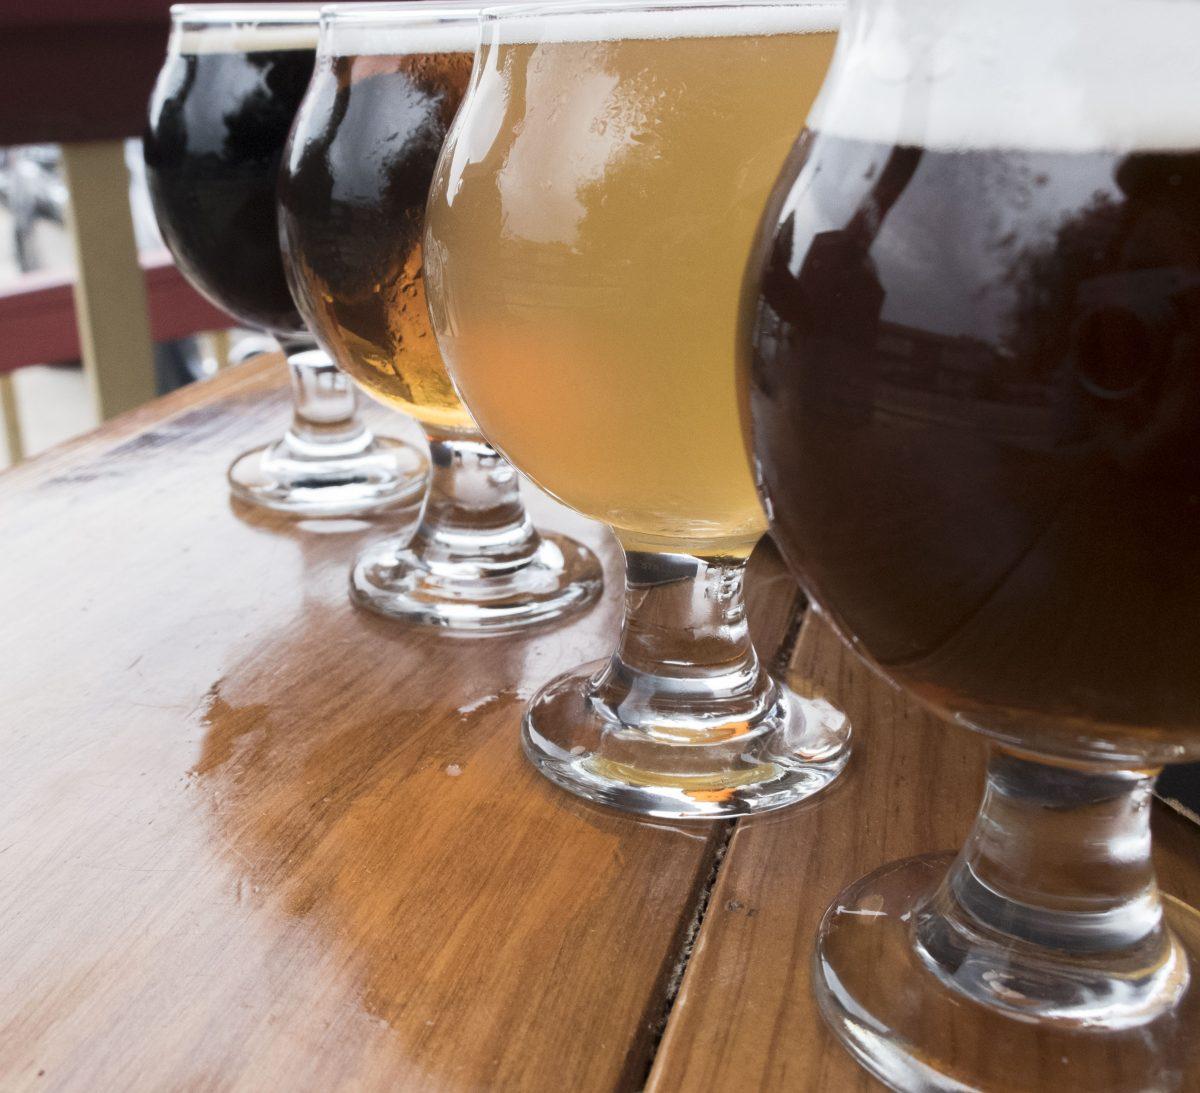 At Blackwater Draw customers can order a beer flight where they can try four different kinds of beers, such as IPAs or porters. 